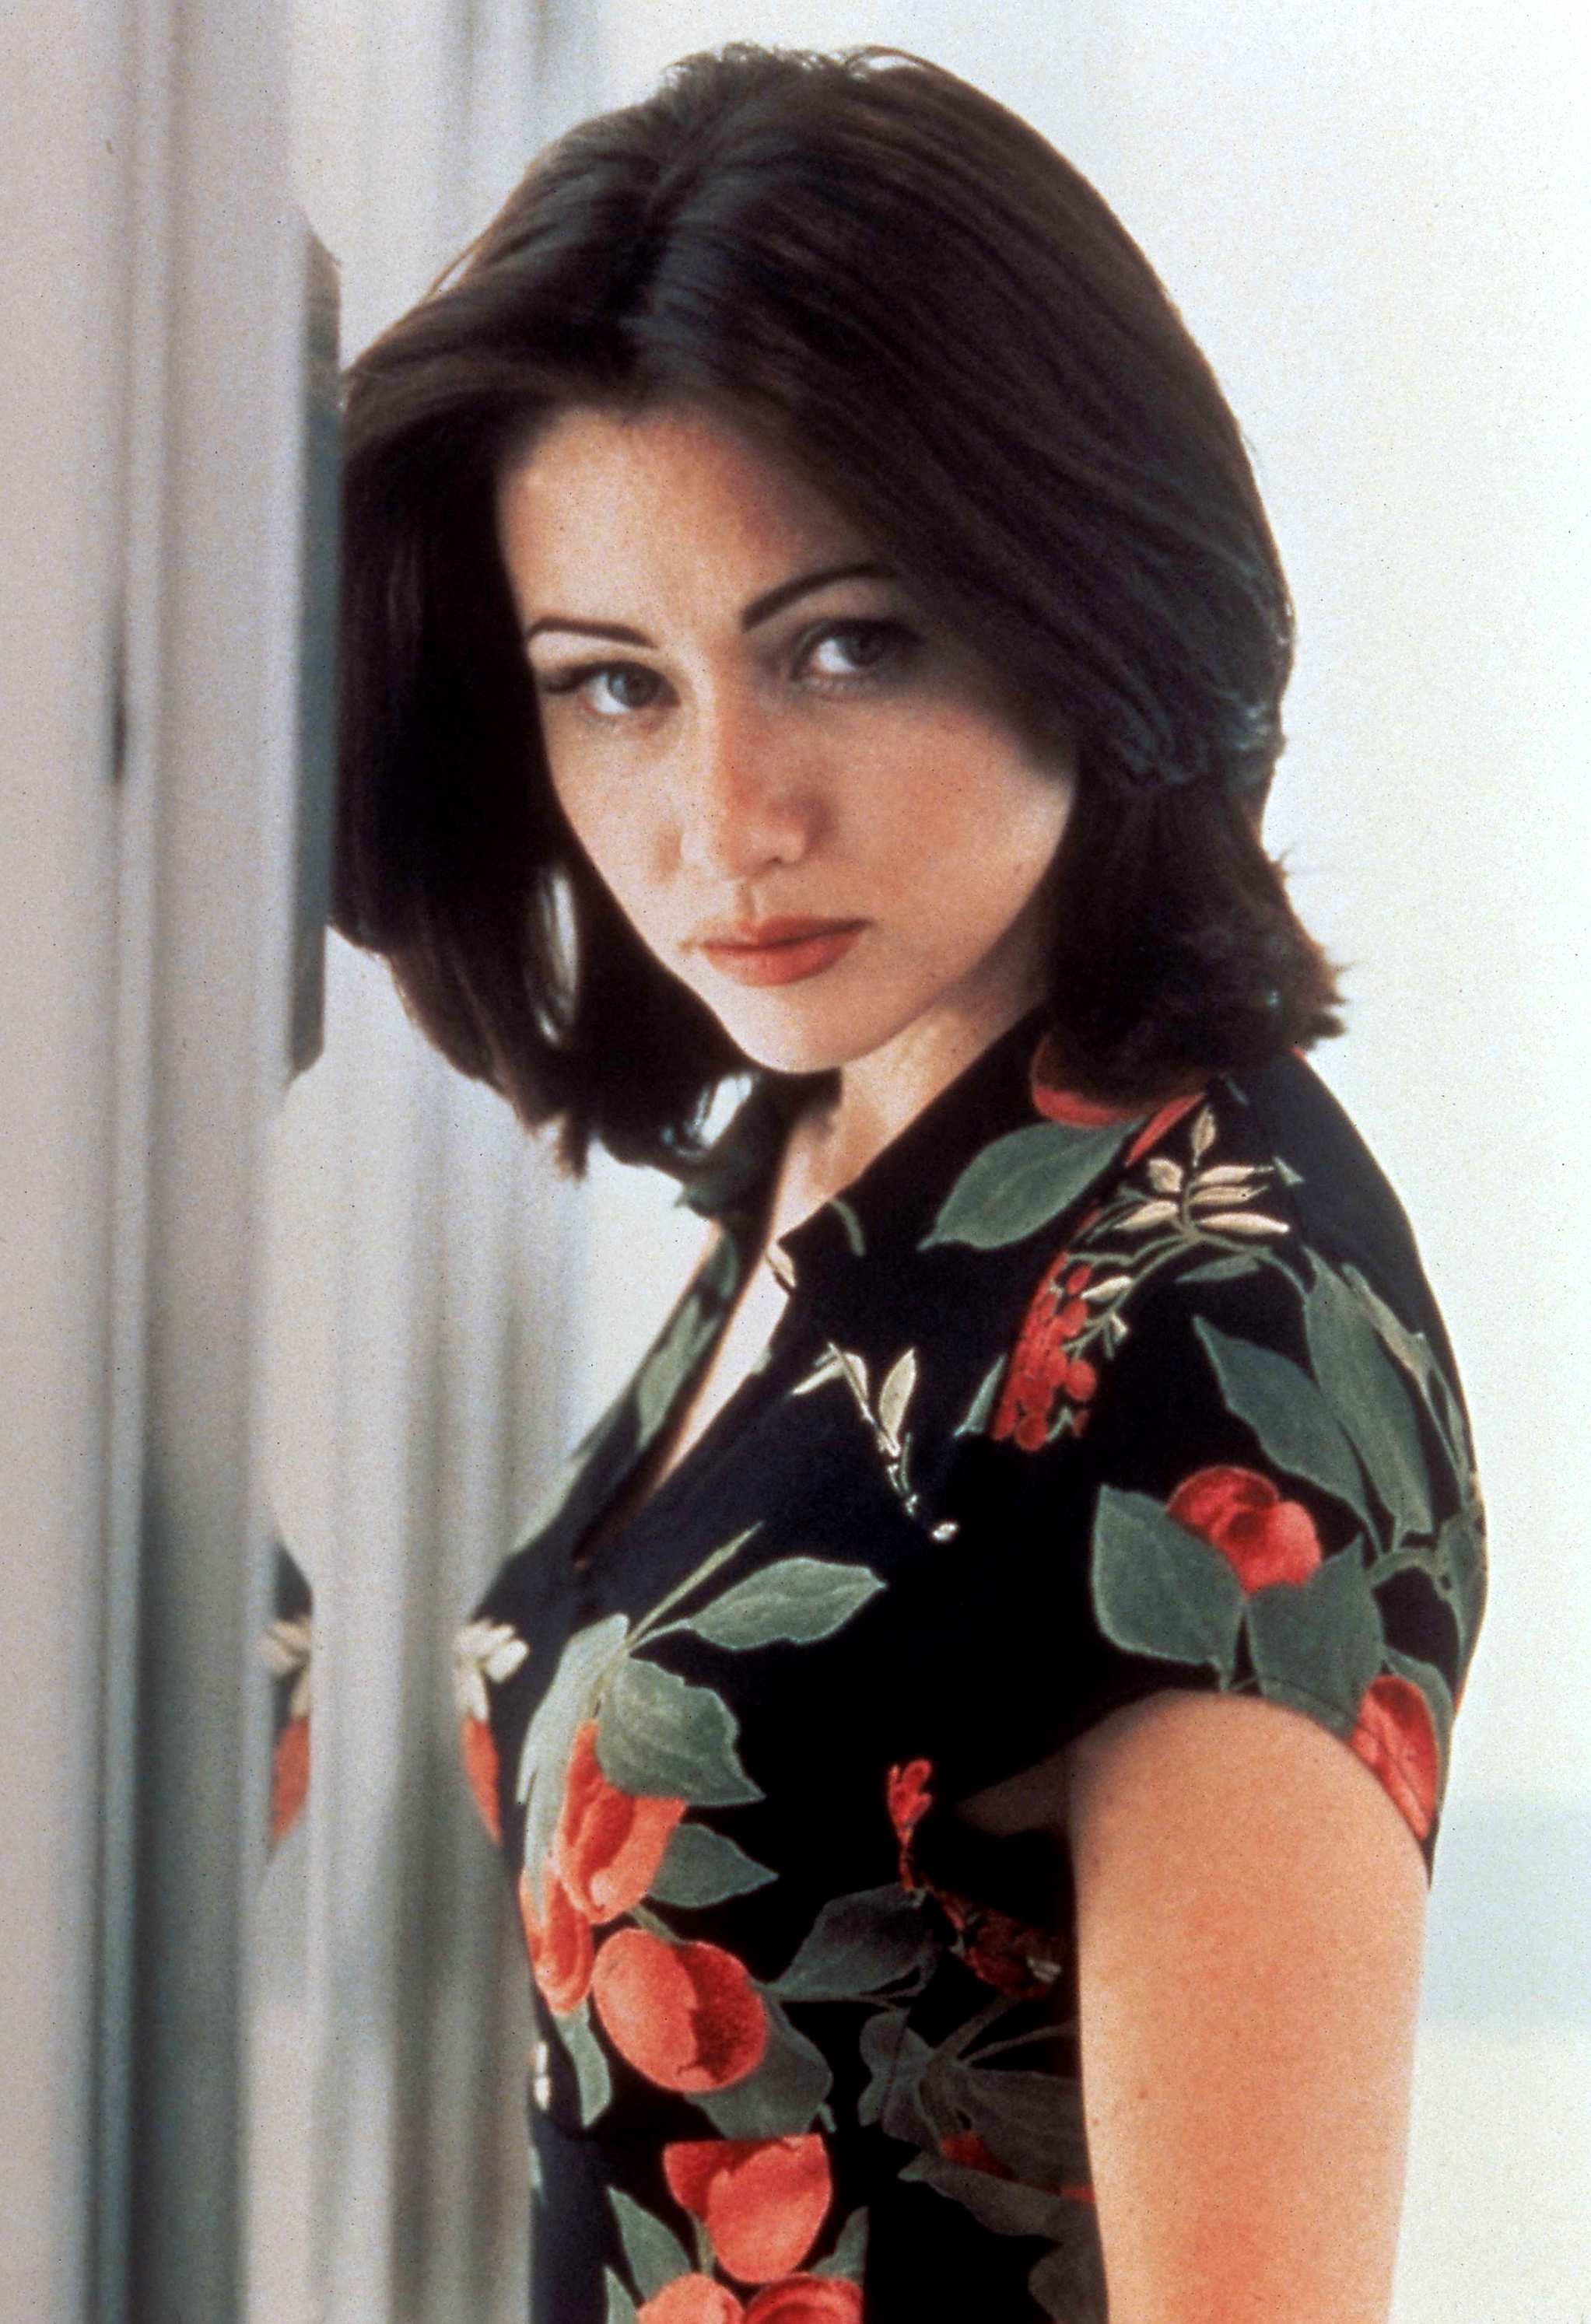 Shannen Doherty photo 99 of 287 pics, wallpaper - photo #128702 - ThePlace2